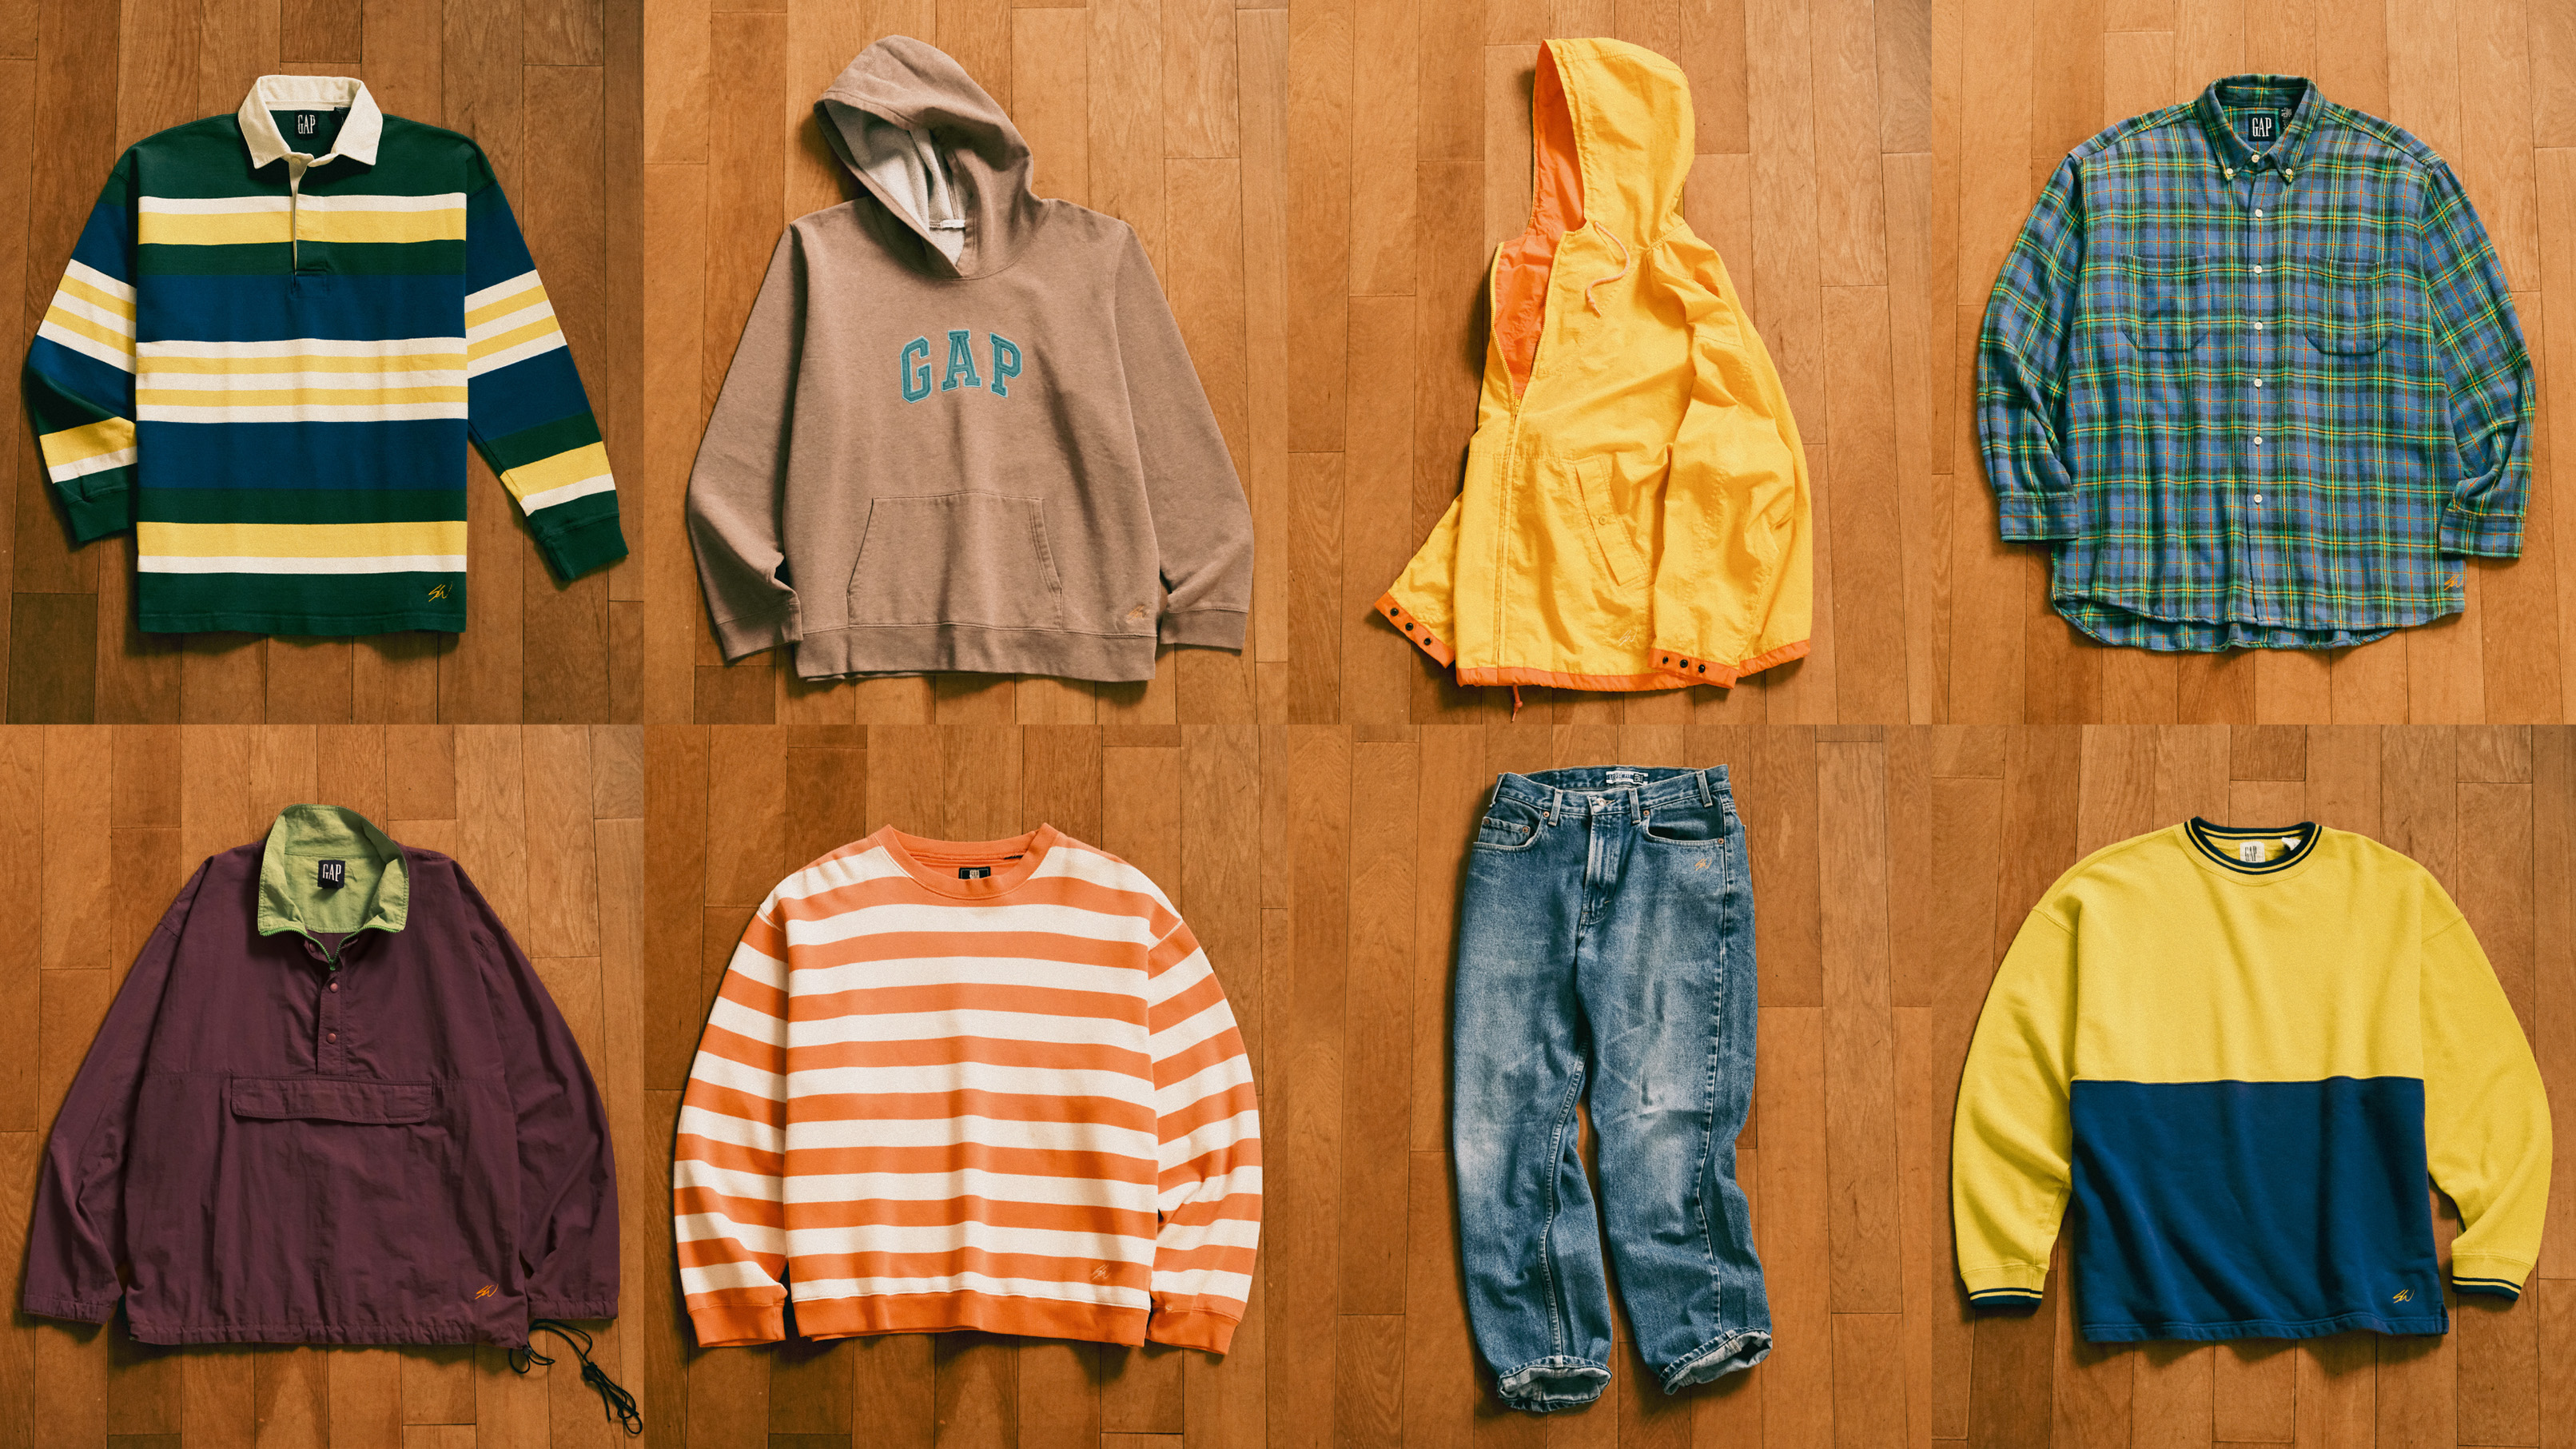 A vintage GAP item handpicked by designer Sean Wotherspoon for his latest GAP collection